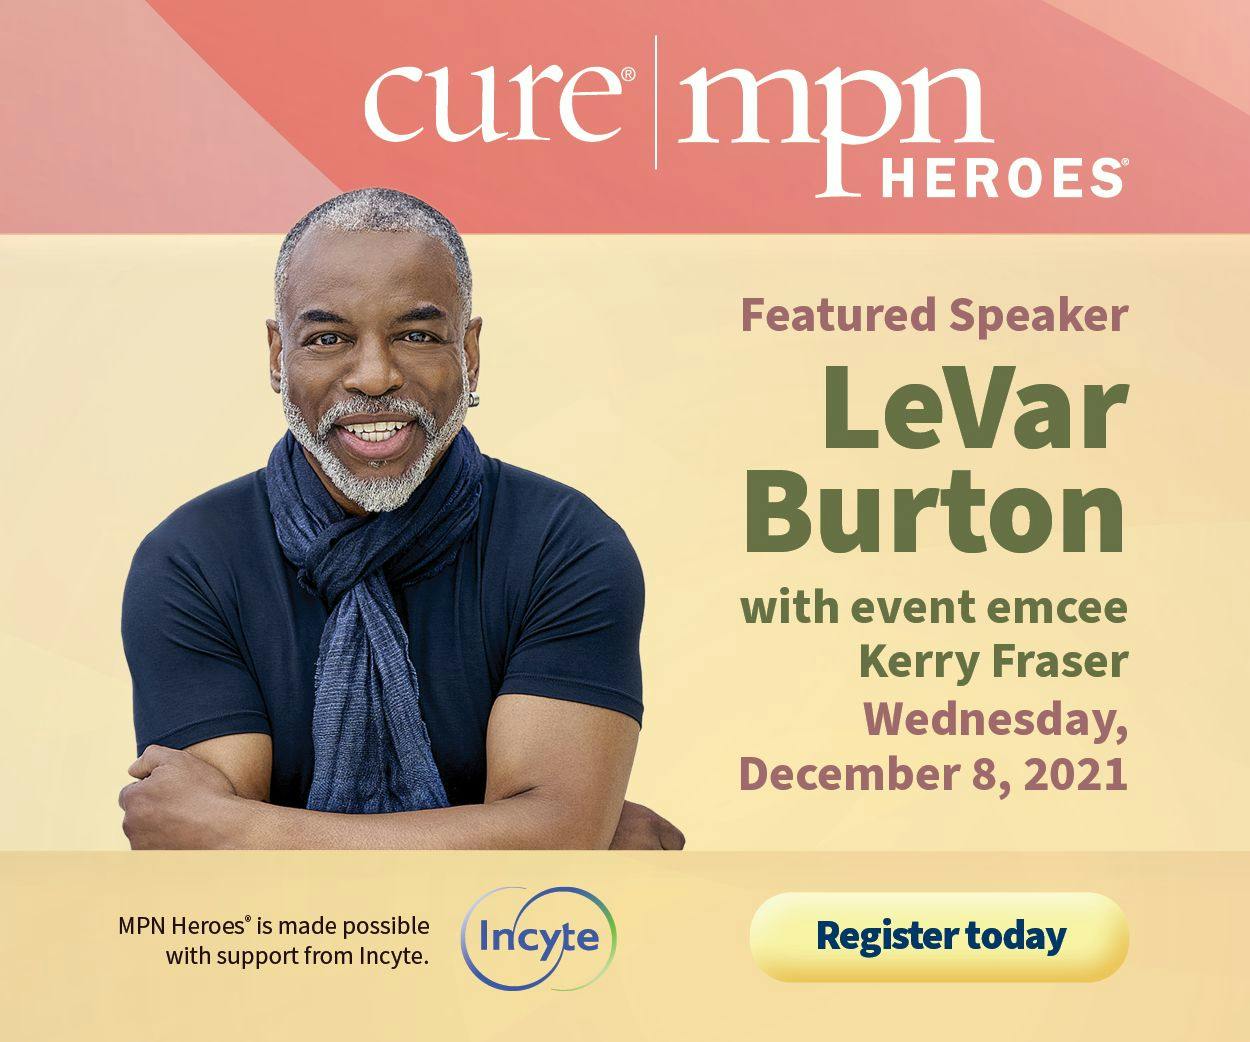 CURE® Celebrates Eight Individuals’ Contributions at the 9th Annual MPN Heroes Program